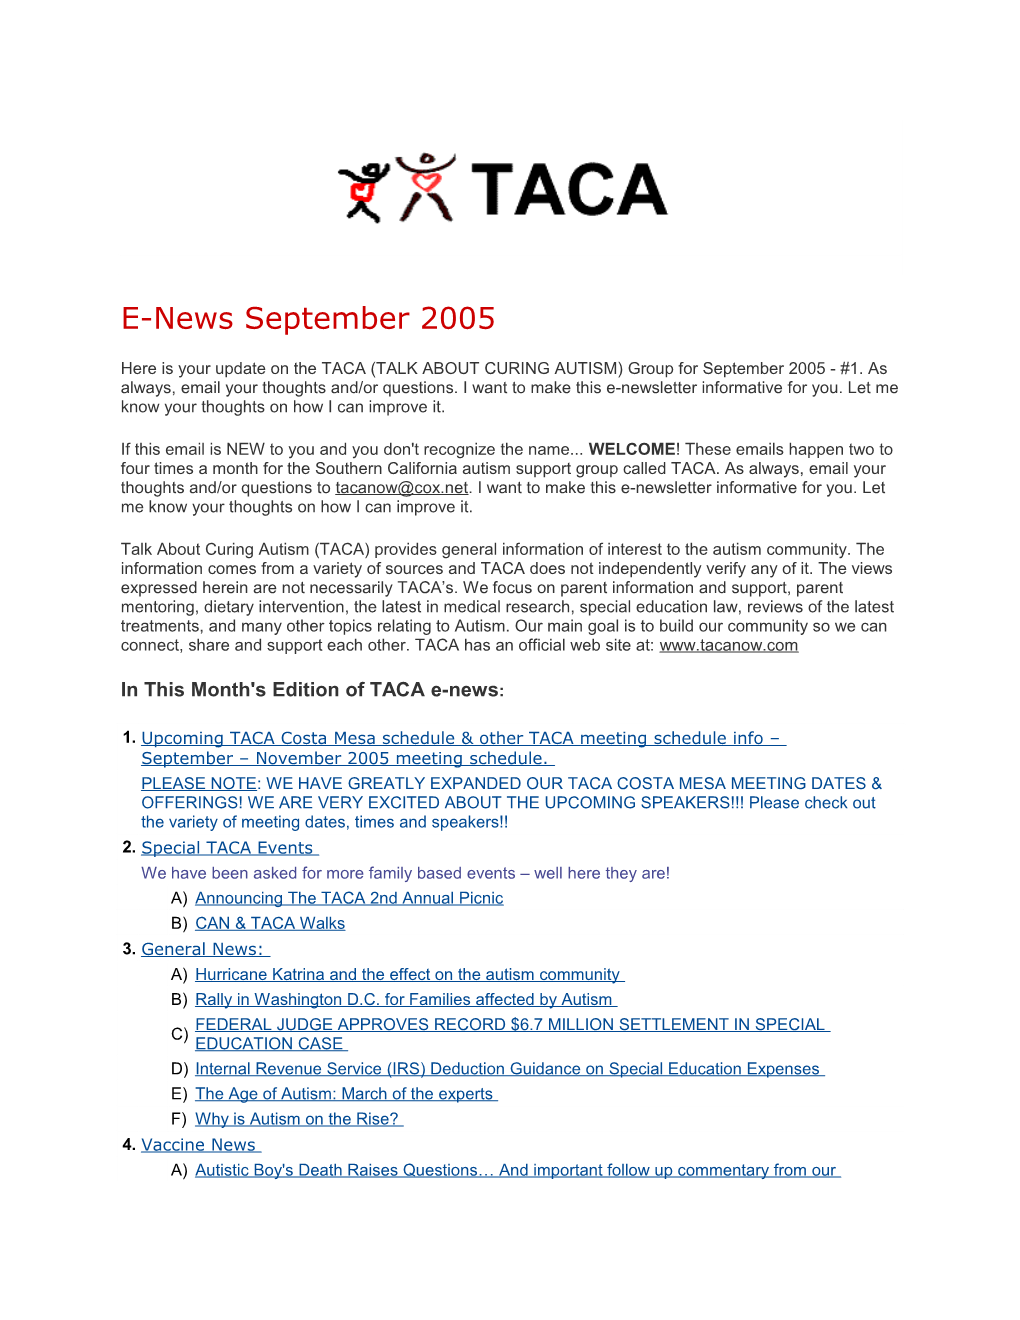 In This Month's Edition of TACA E-News s1